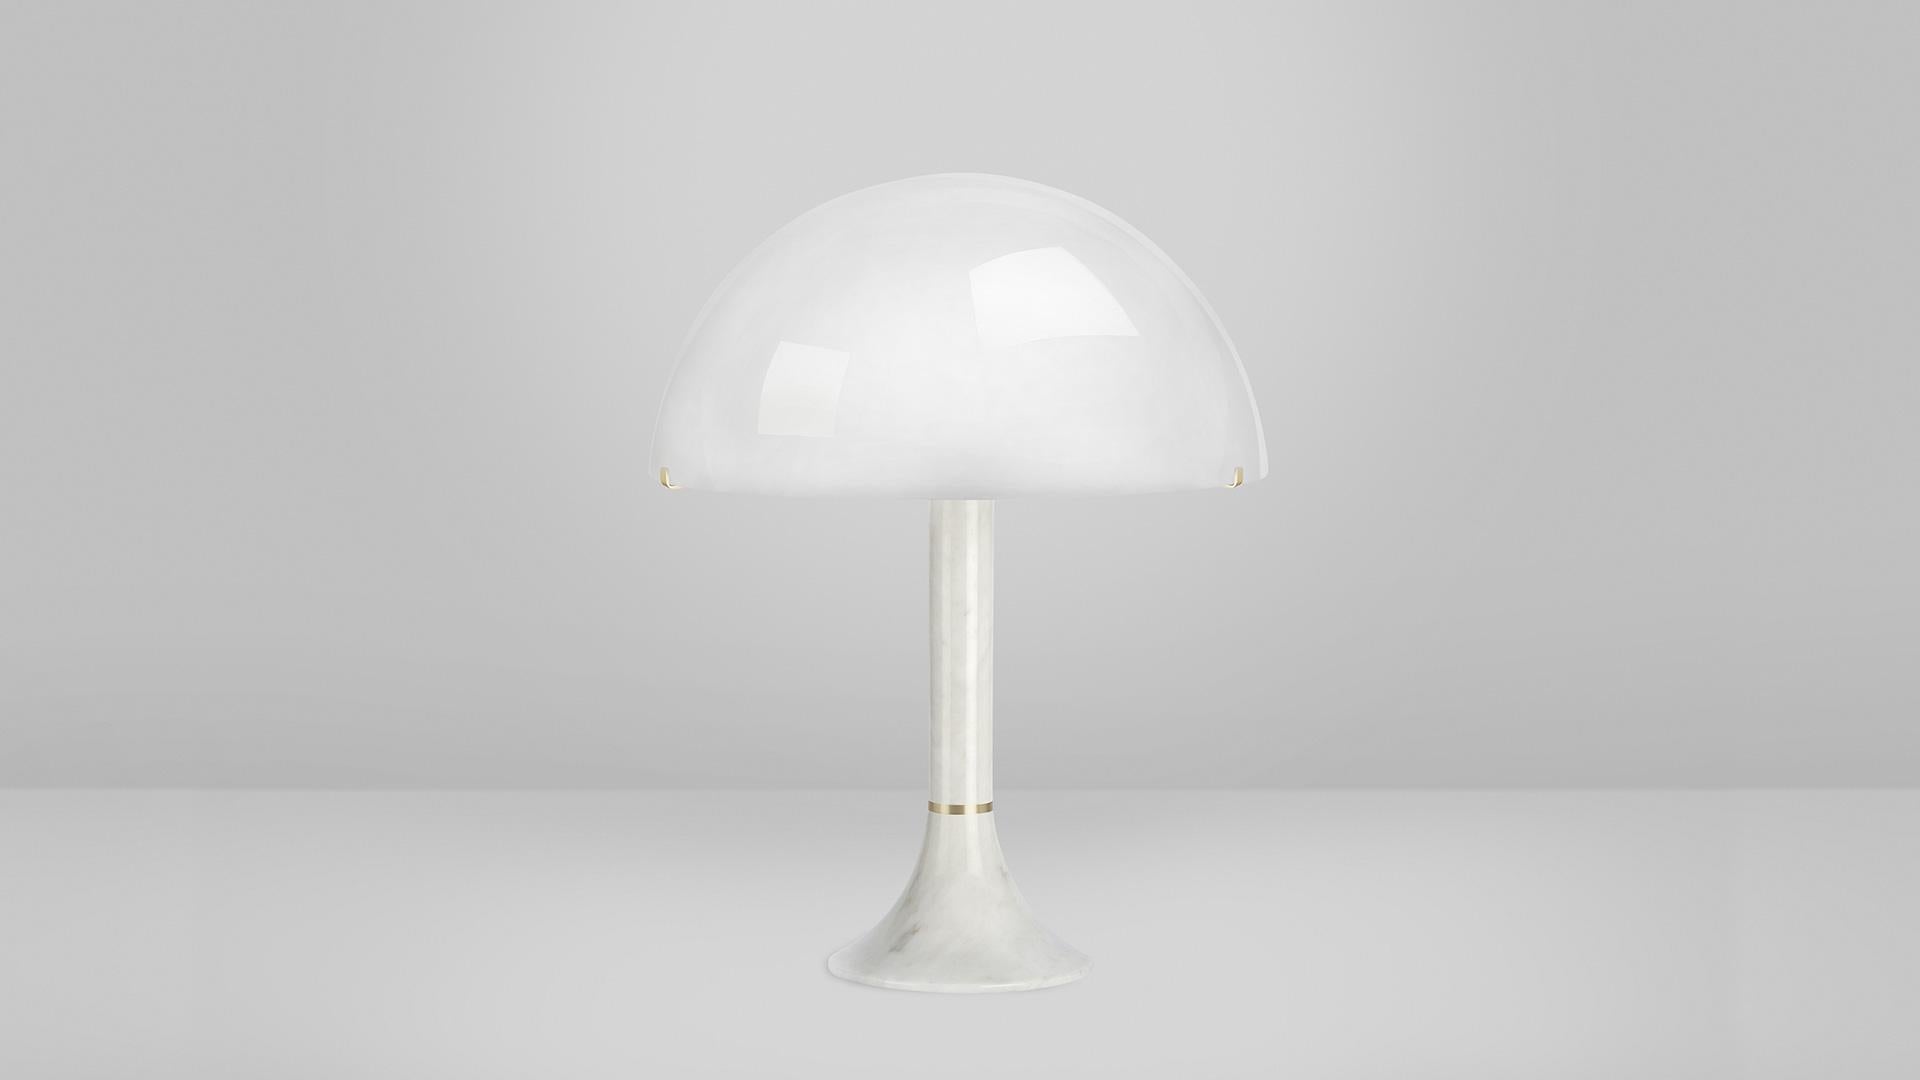 White Carrara Marble Bloomsbury Table Lamp by CTO Lighting
Materials: polished white carrara marble with satin brass and opal glass shade
Dimensions: 38.5 x H 49 cm

All our lamps can be wired according to each country. If sold to the USA it will be